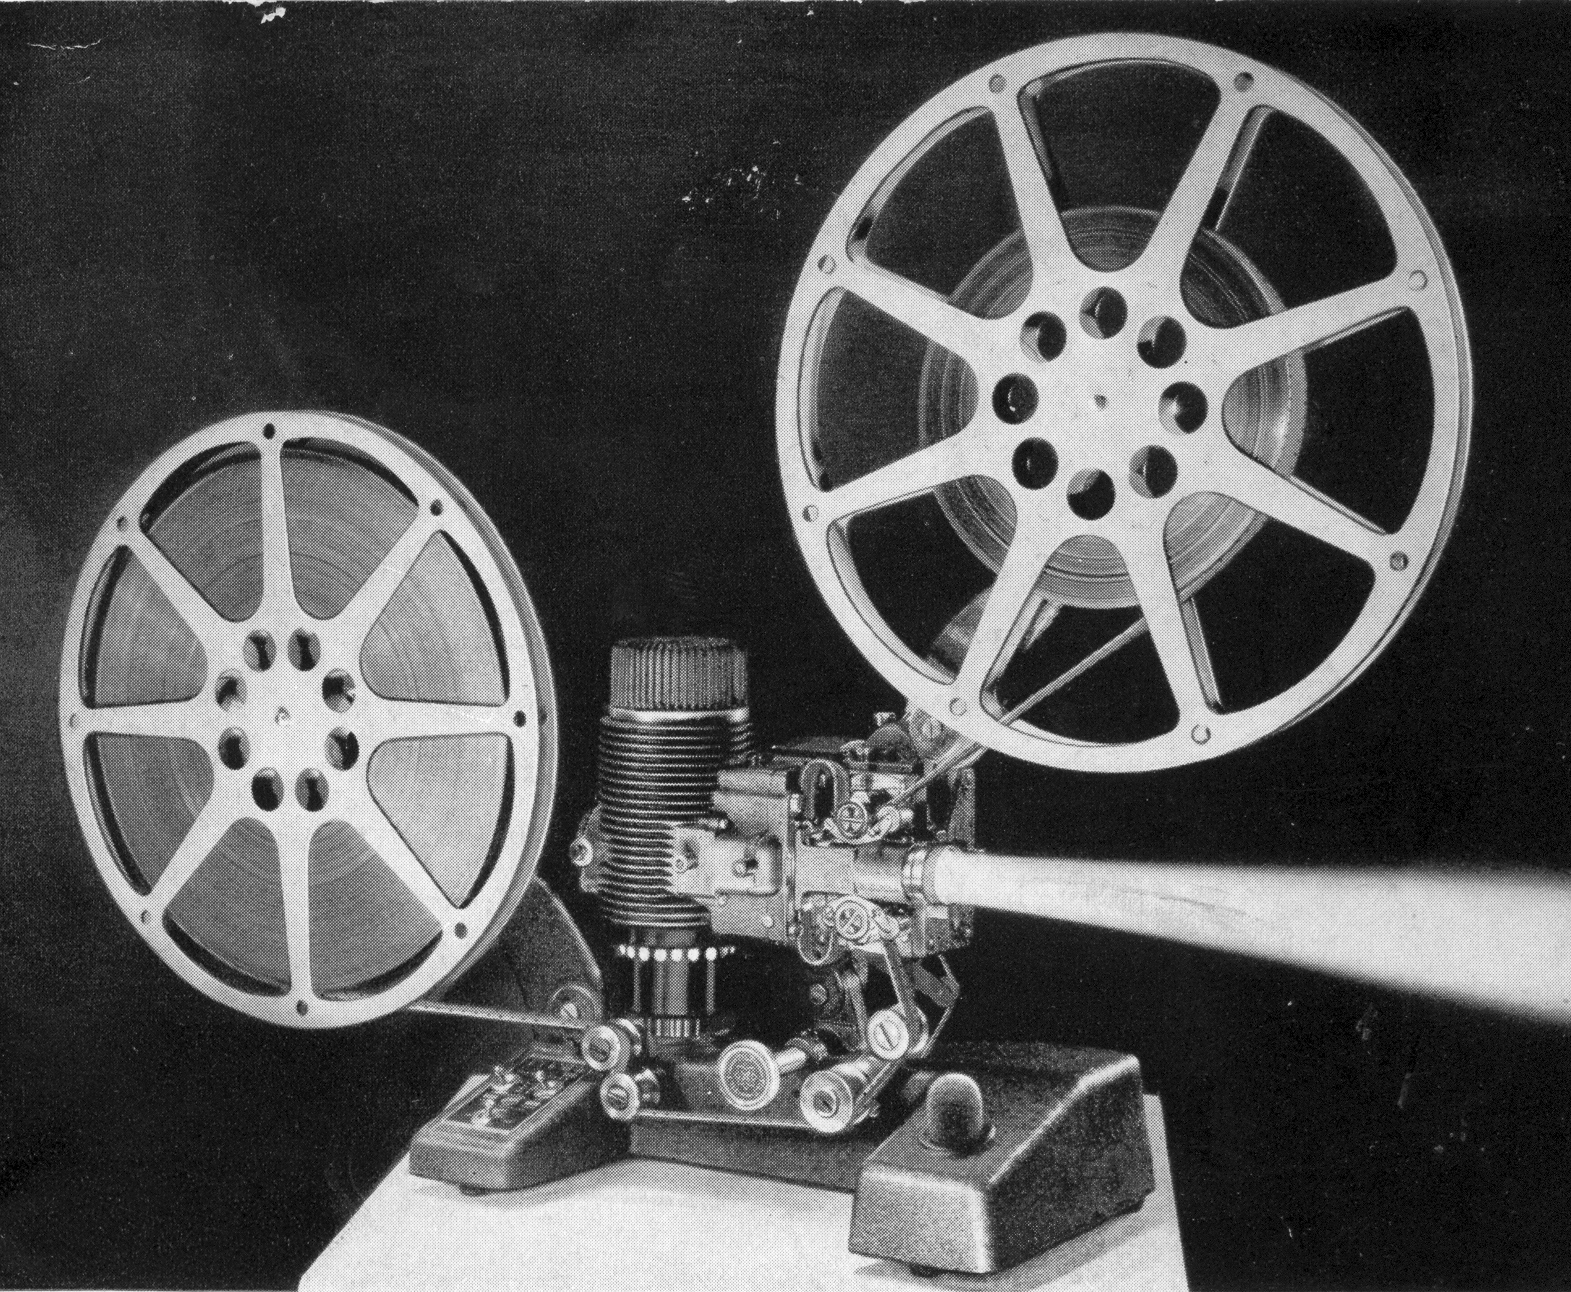 Used 16mm & 8mm projectors including Bell & Howell, RCA, Bolex, Keystone,  Singer, and others.